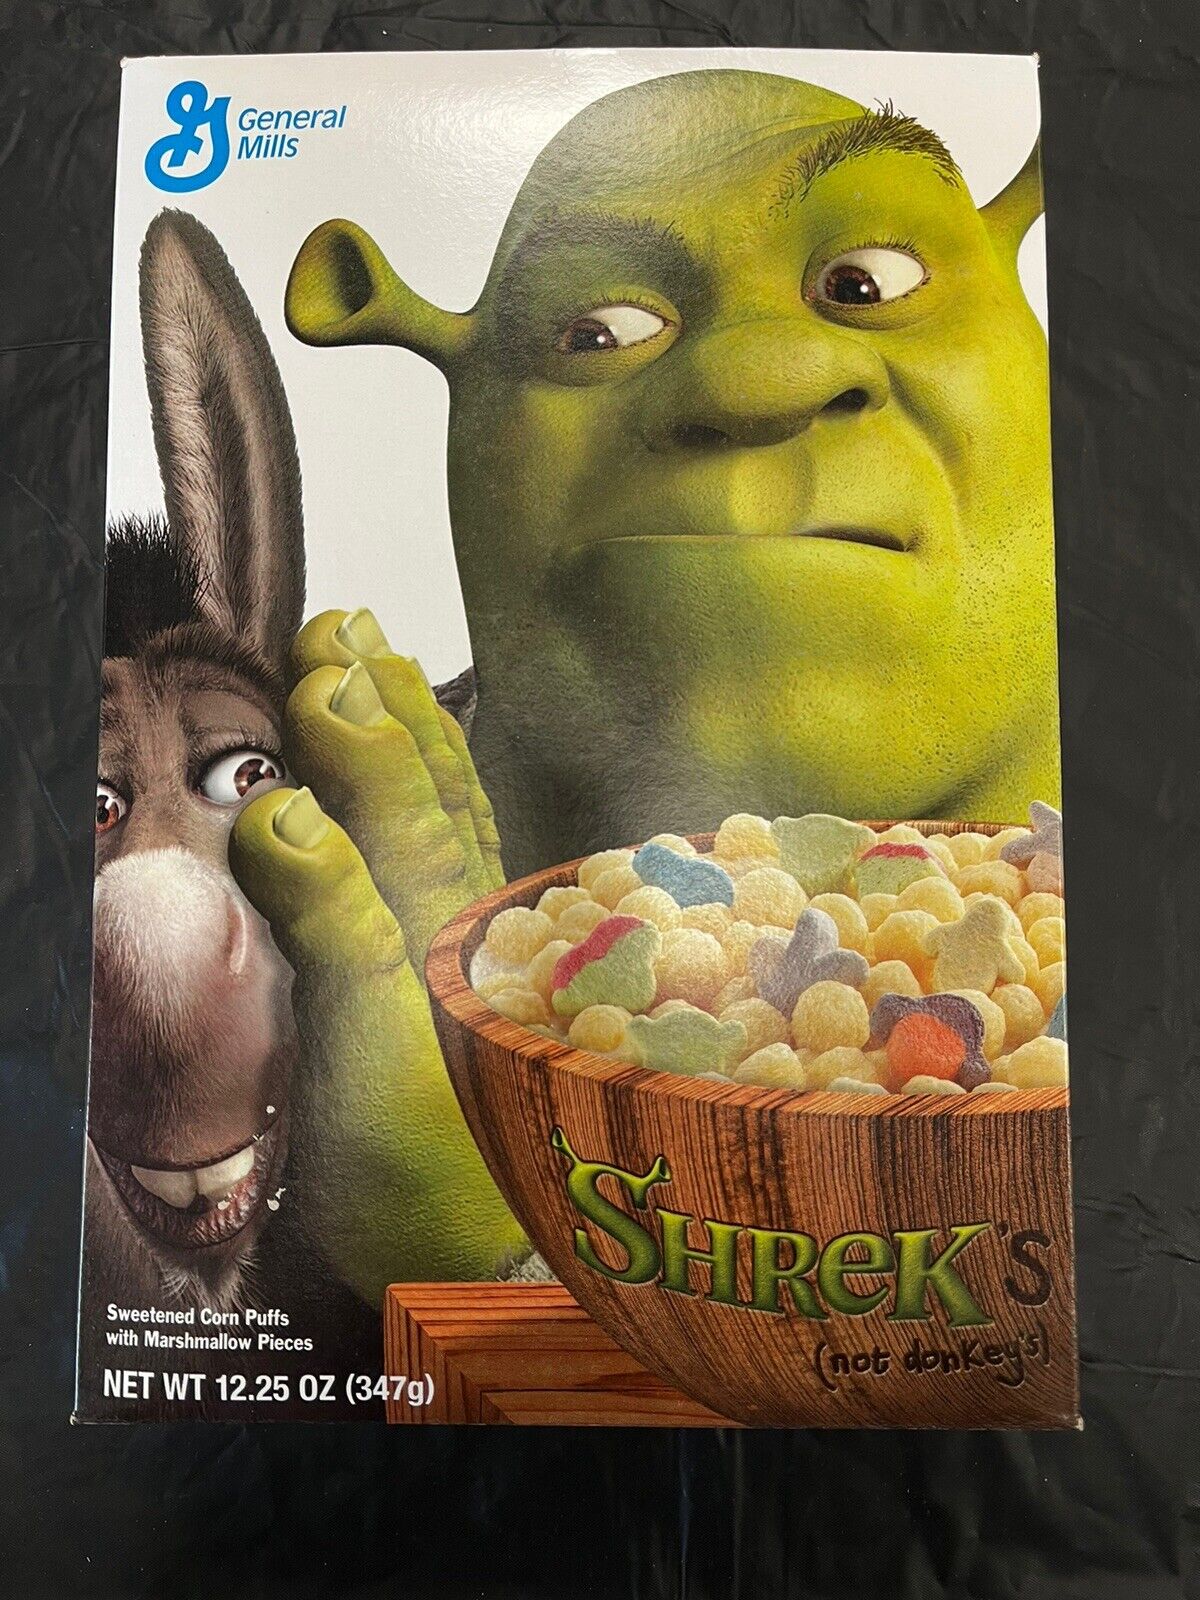 VTG Shrek’s (not donkey’s) Cereal Box General Mills 2003 Excellent Cond Not Flat